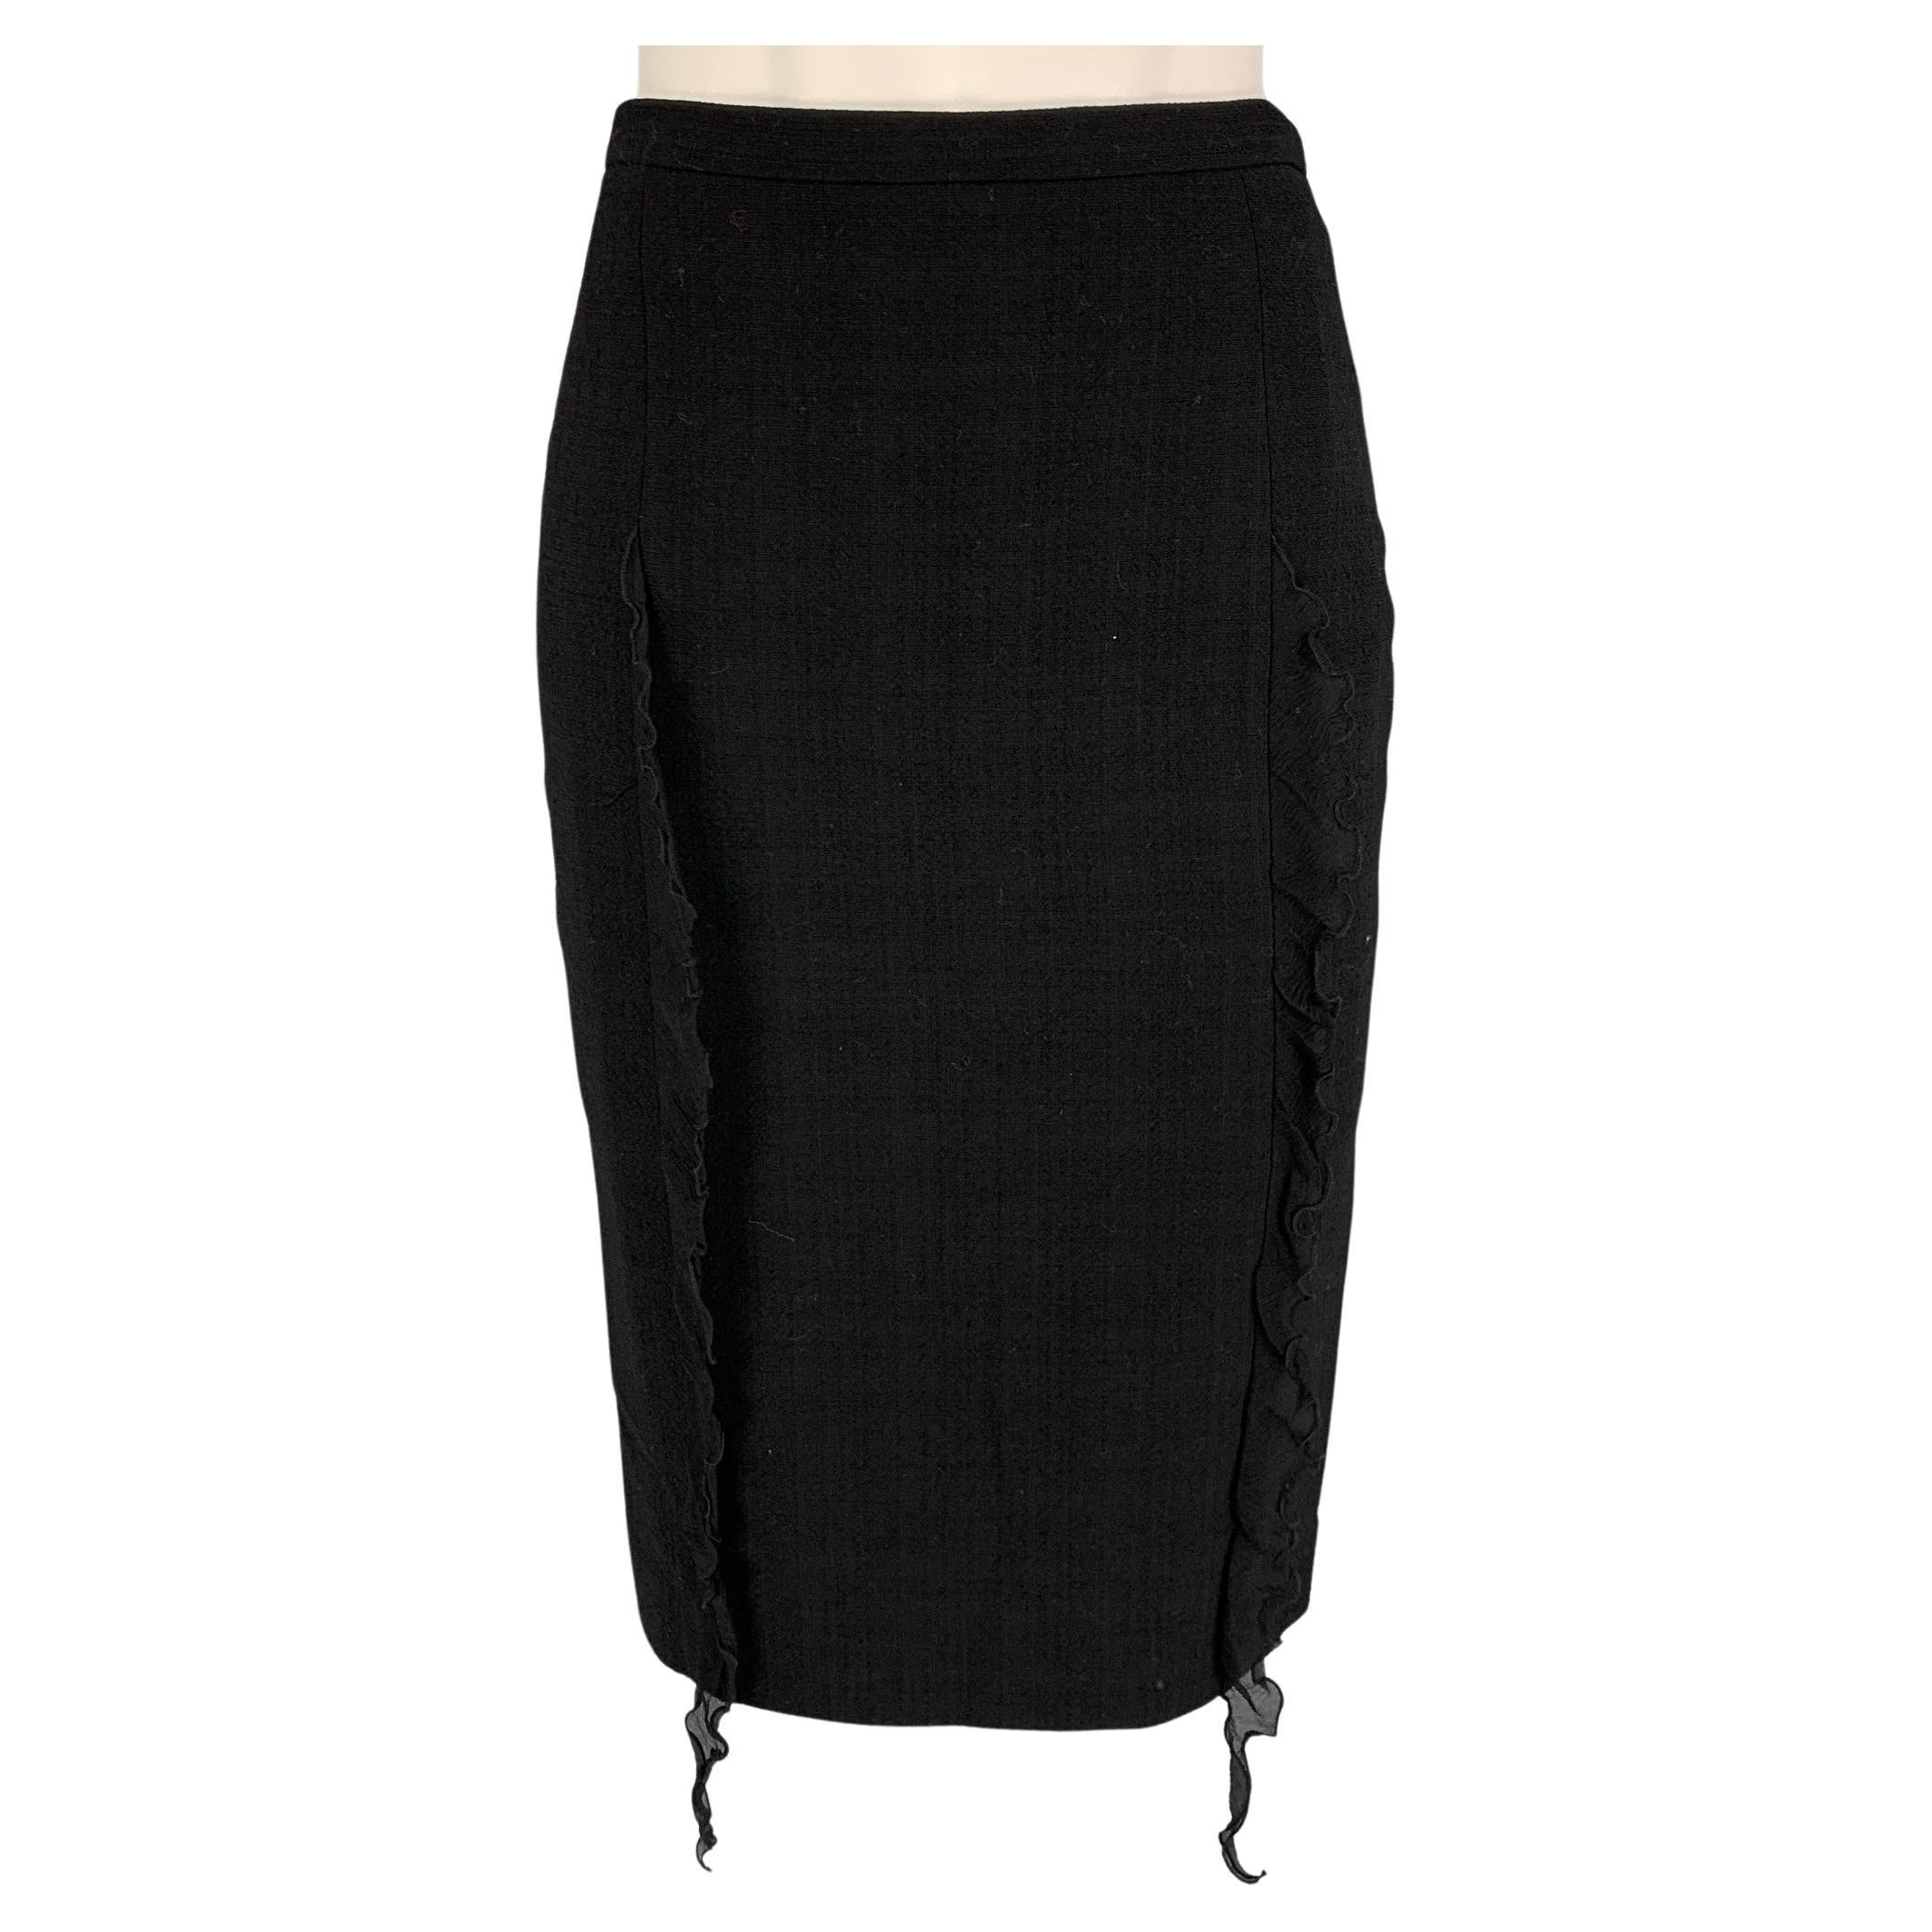 CHEAP AND CHIC by MOSCHINO Size 4 Black Silk Ruffled Pencil Below Knee Skirt